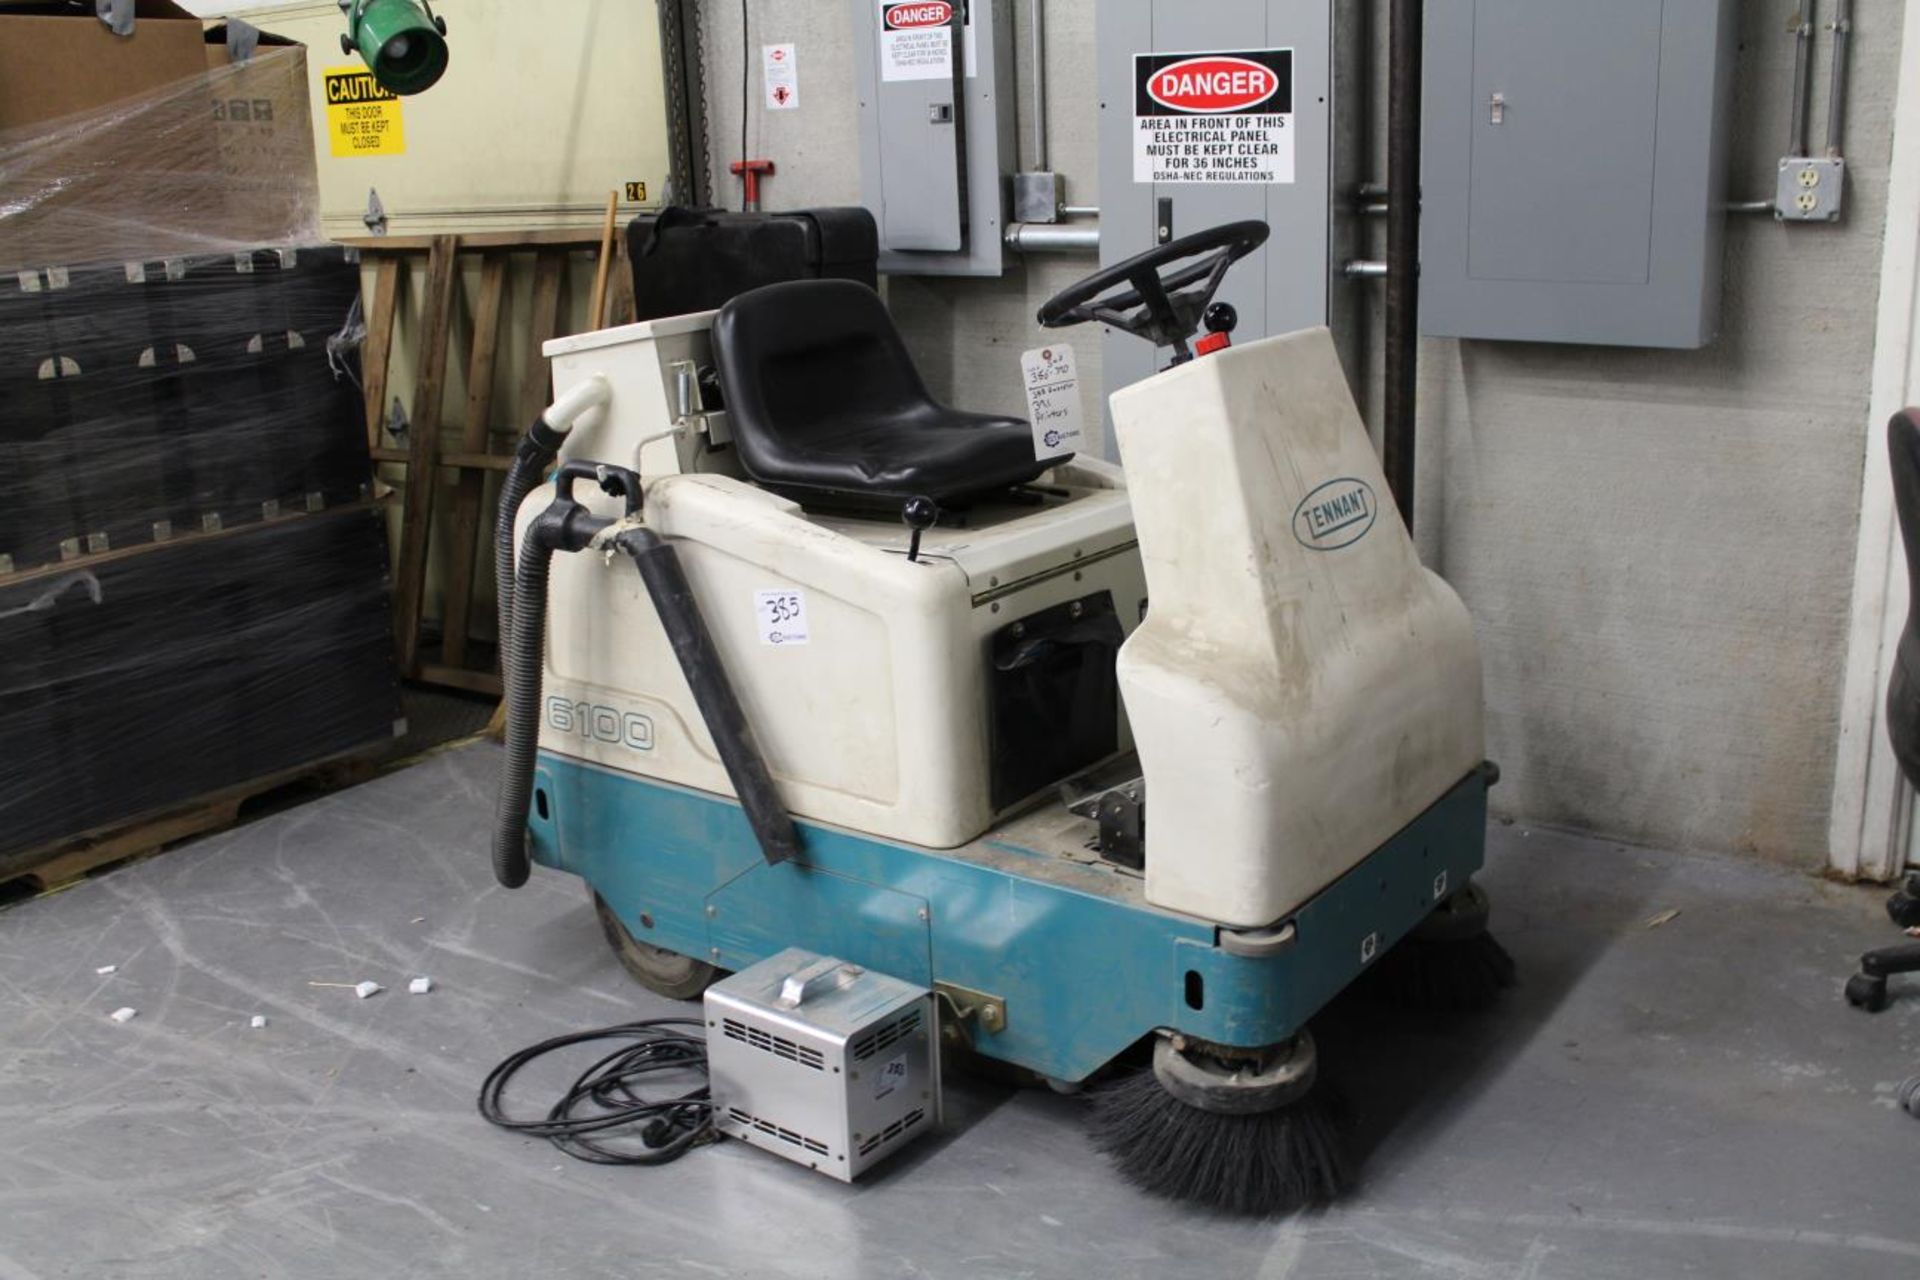 Tennant 6100 Electric Floor Sweeper (video) 36V, 1675lbs, 32" Wide, Tennant SCR362017 Charger 36v/